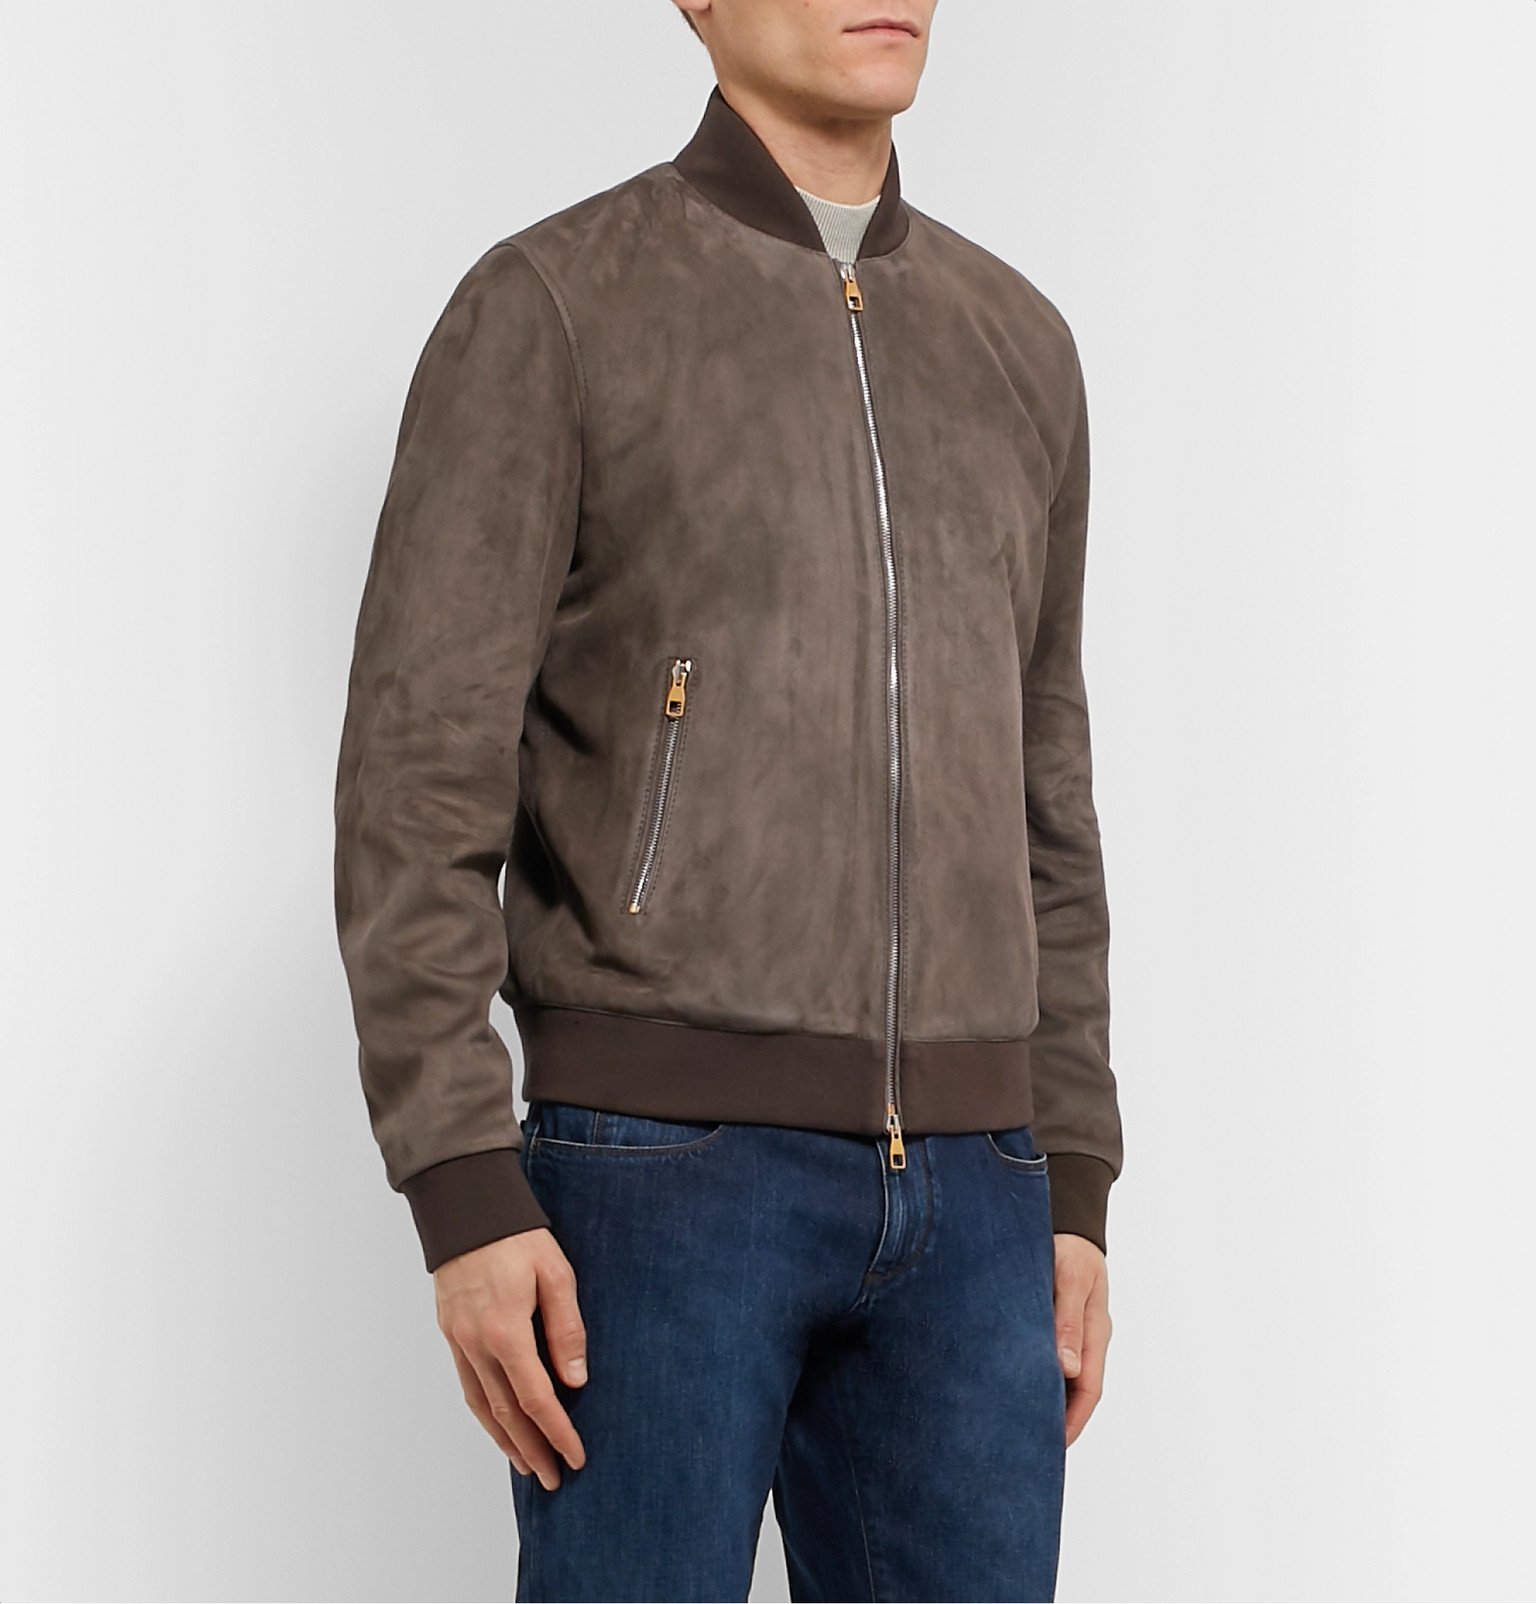 Dunhill - Suede Bomber Jacket - Brown Dunhill